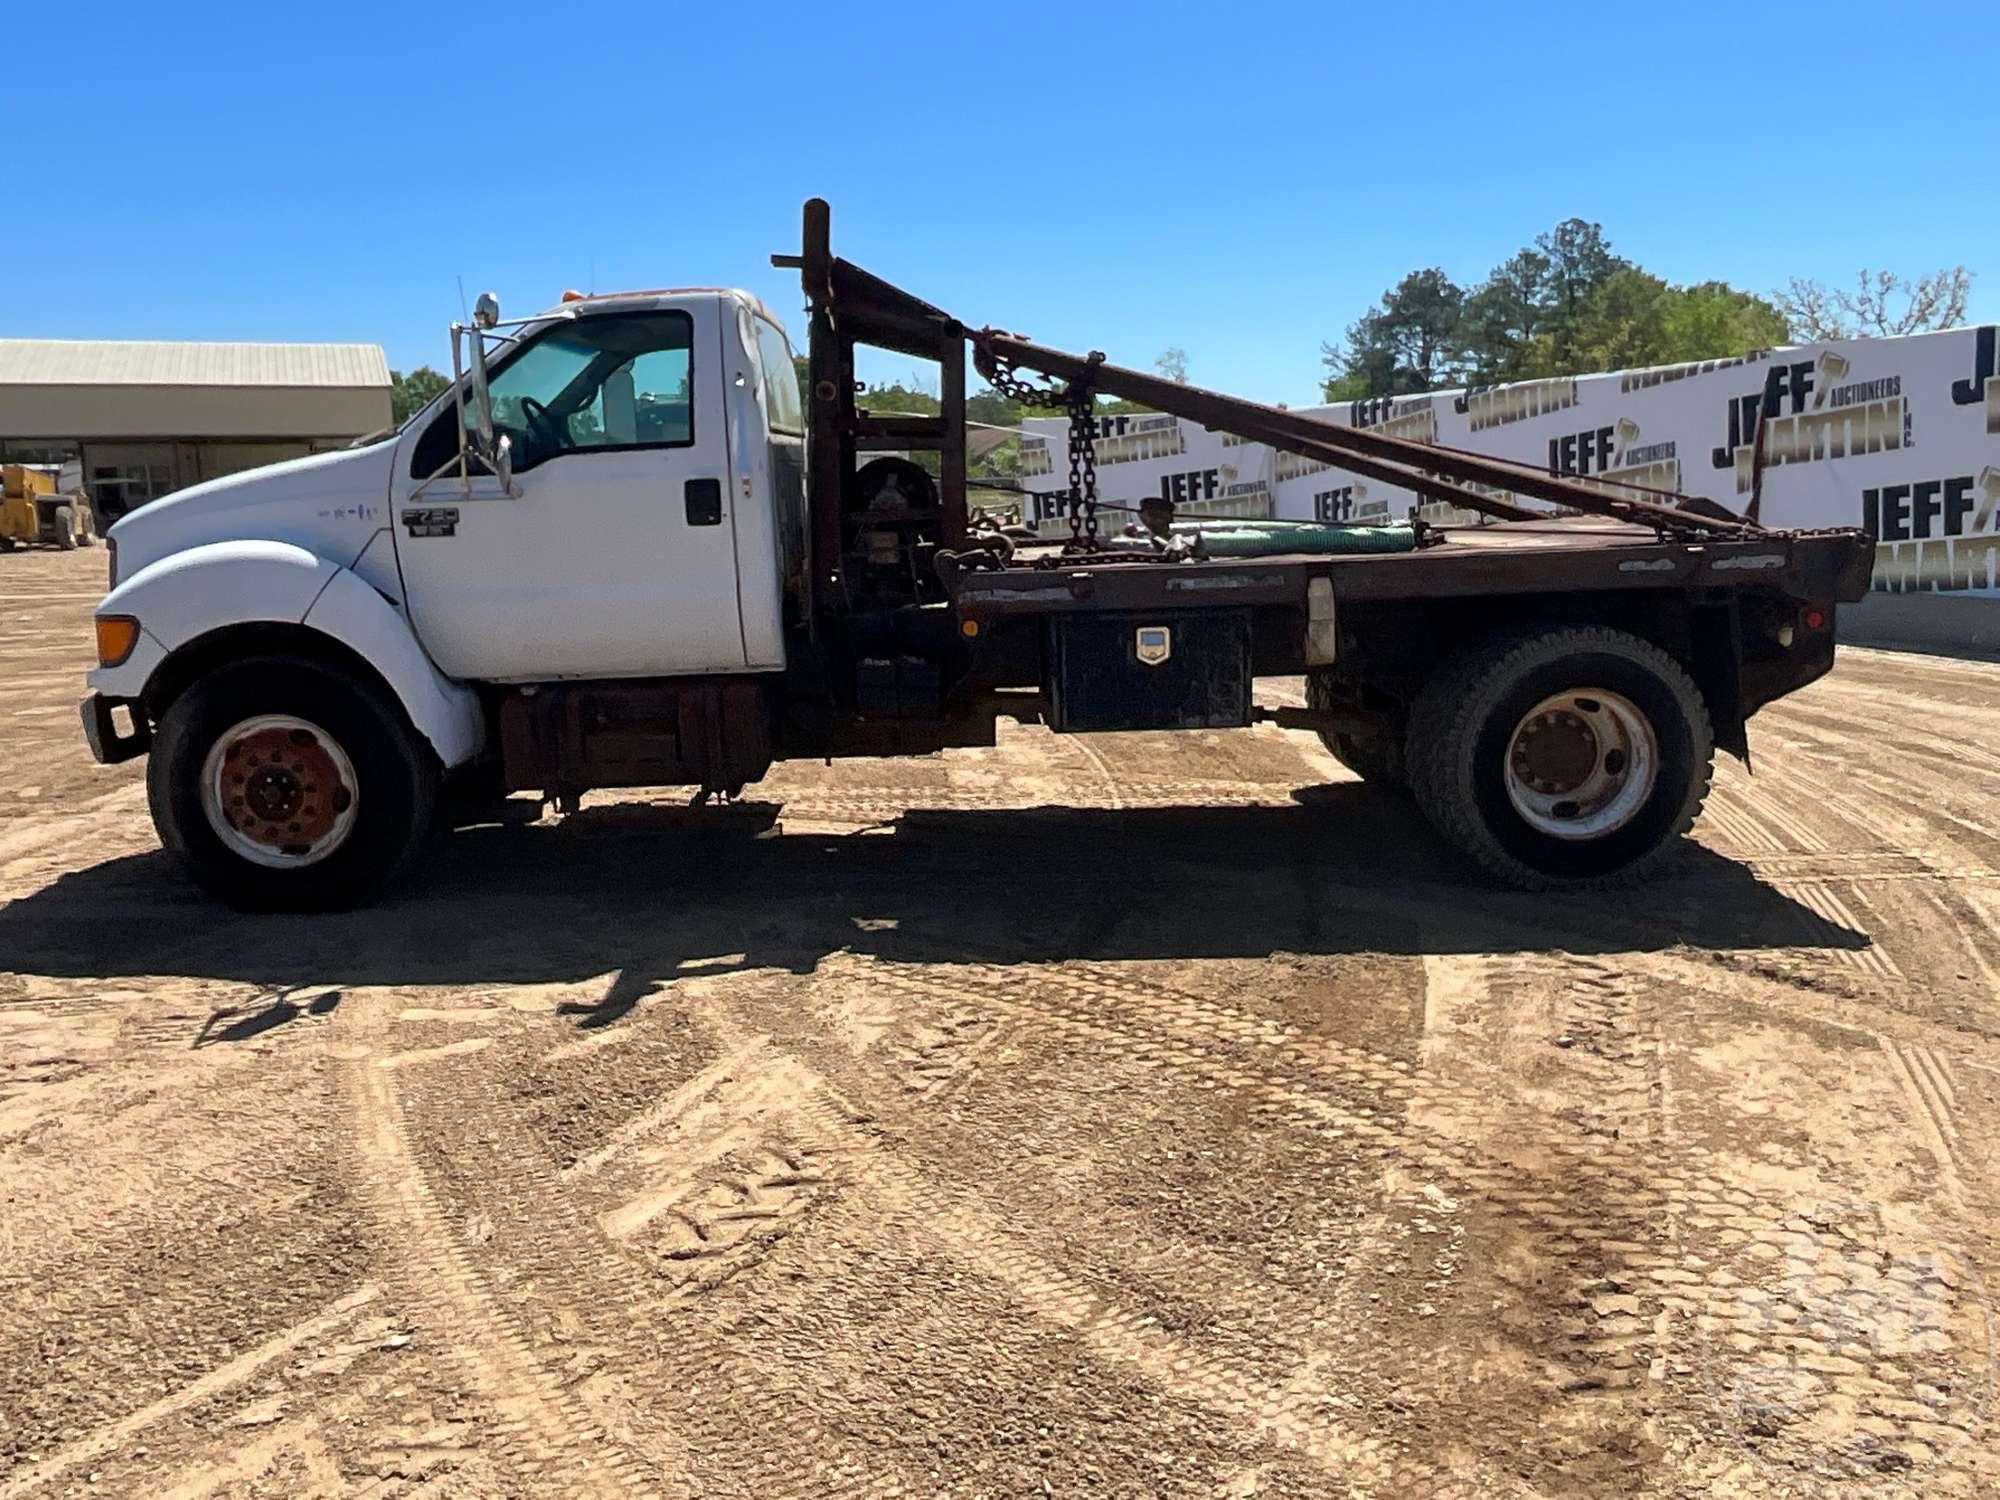 2000 FORD F-750 SUPER DUTY VIN: 3FDXF75R5YMA01520 S/A ROUSTABOUT TRUCK